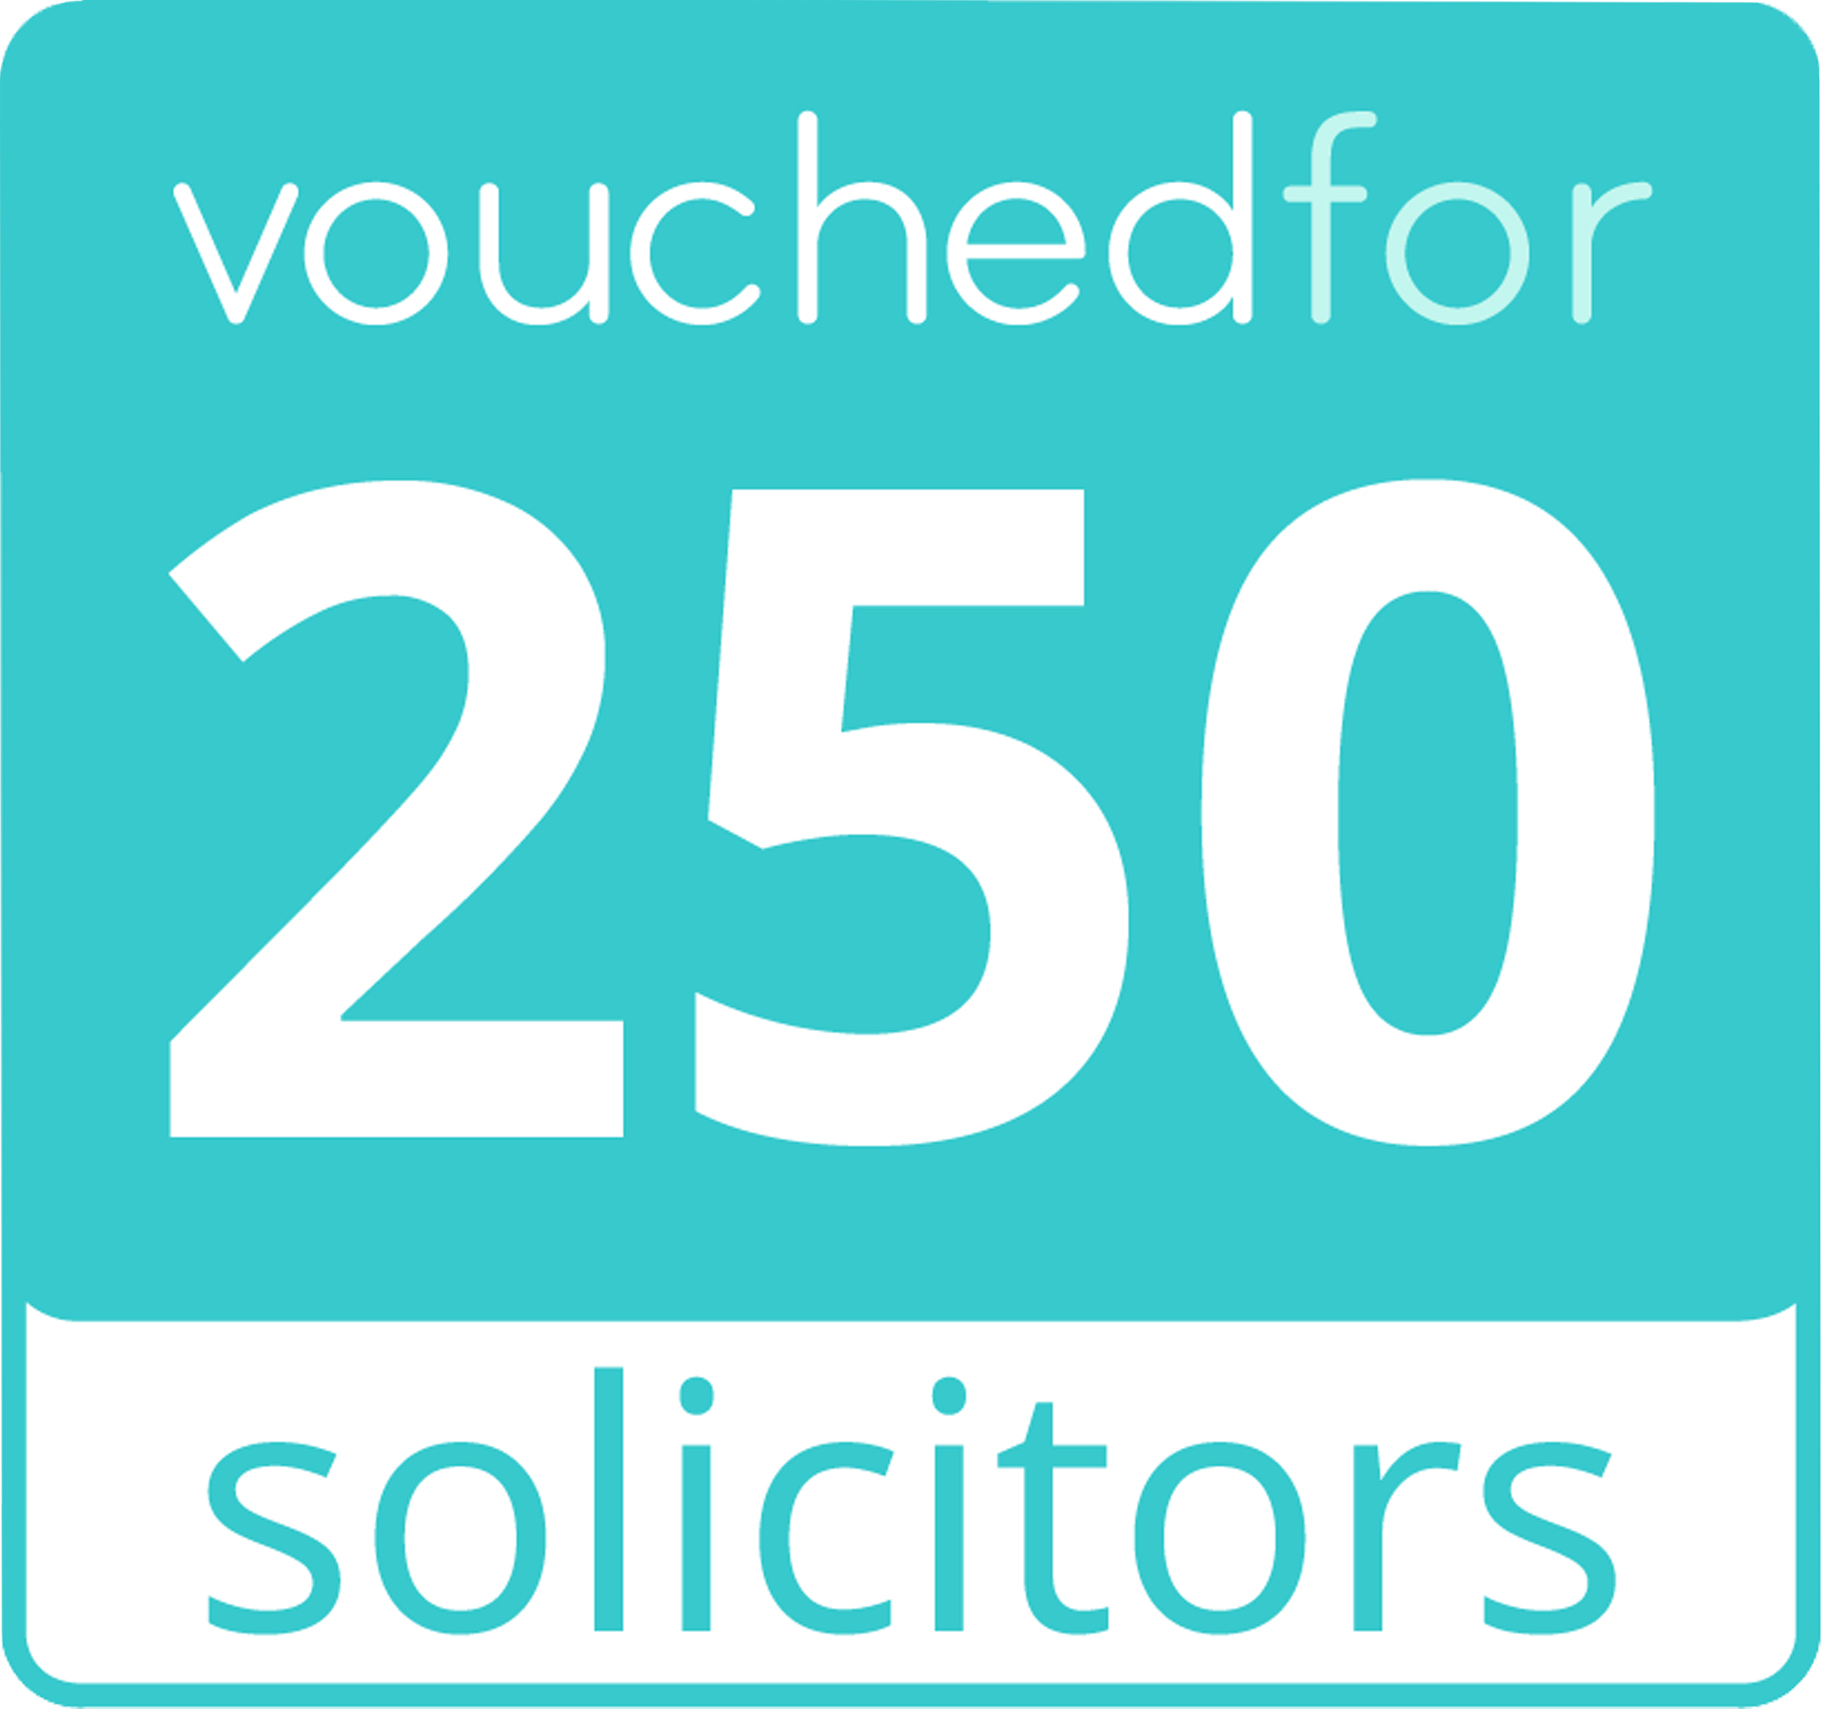 vouched for 250 solicitors